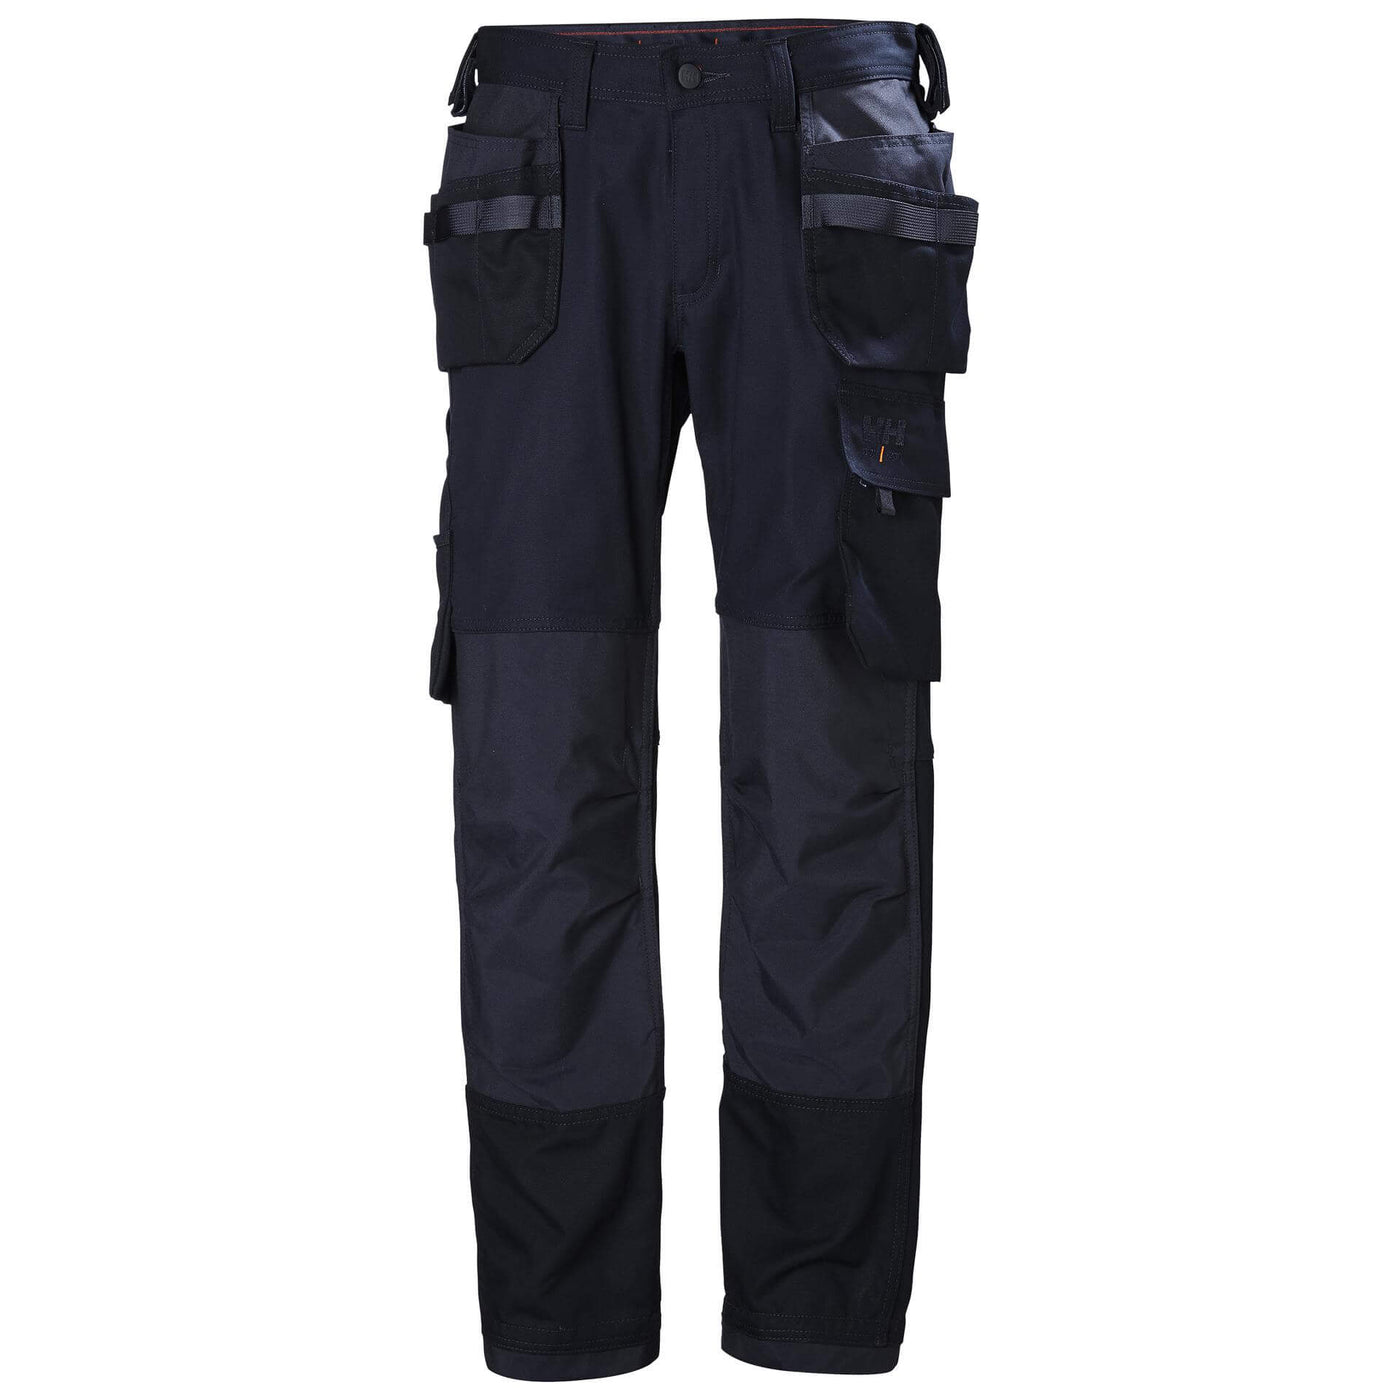 Stanley FatMax Ashley Stretch Work Trousers | Toolstop